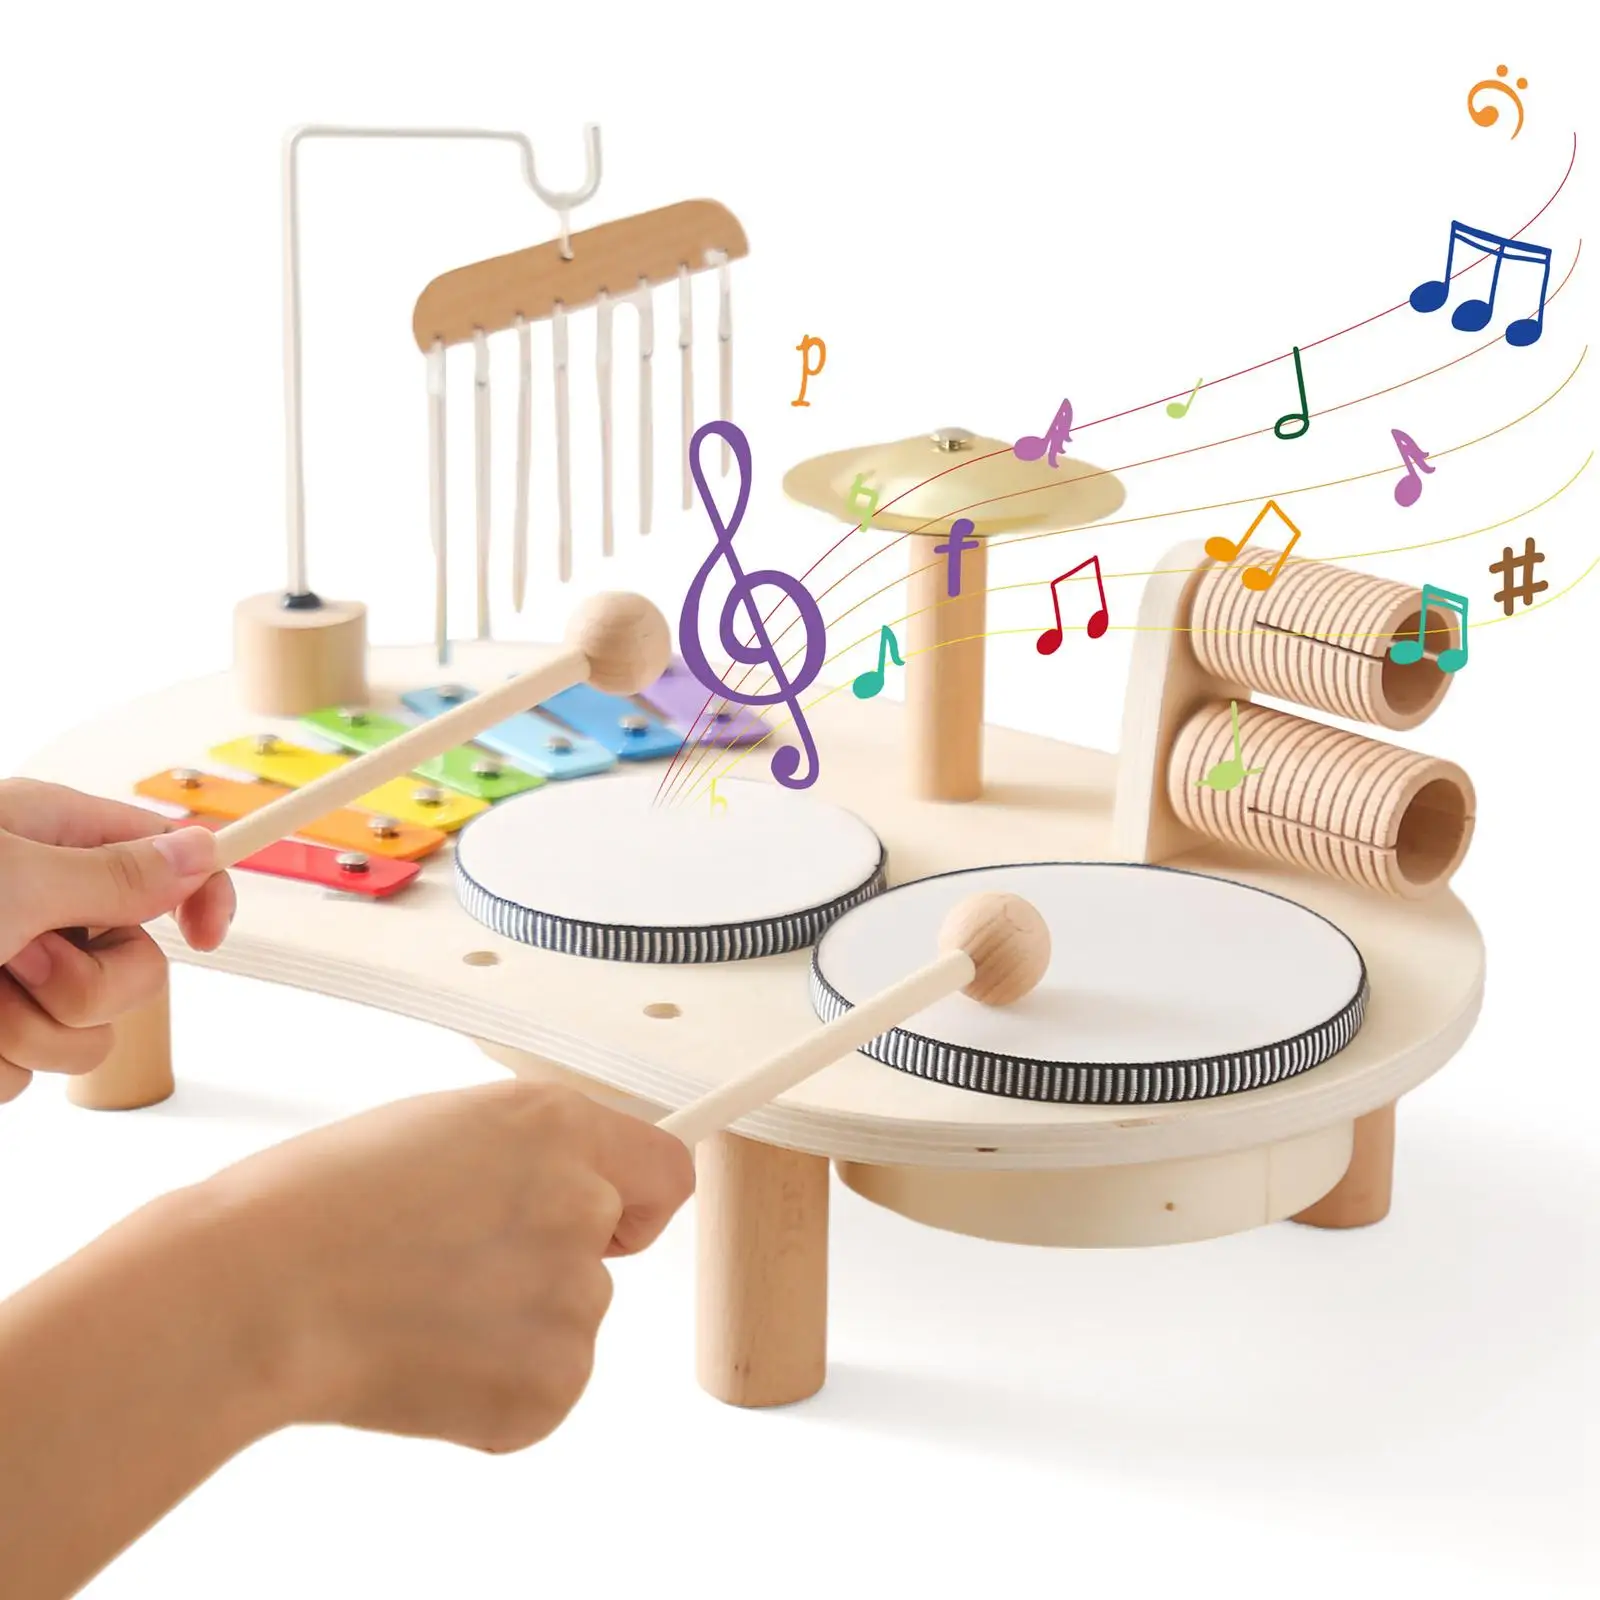 Xylophone Drum Set Developmental Motor Skill Wooden Musical Kits for Kids Boy Girl Toddlers Ages 3 4 5 6 Years Old Birthday Gift